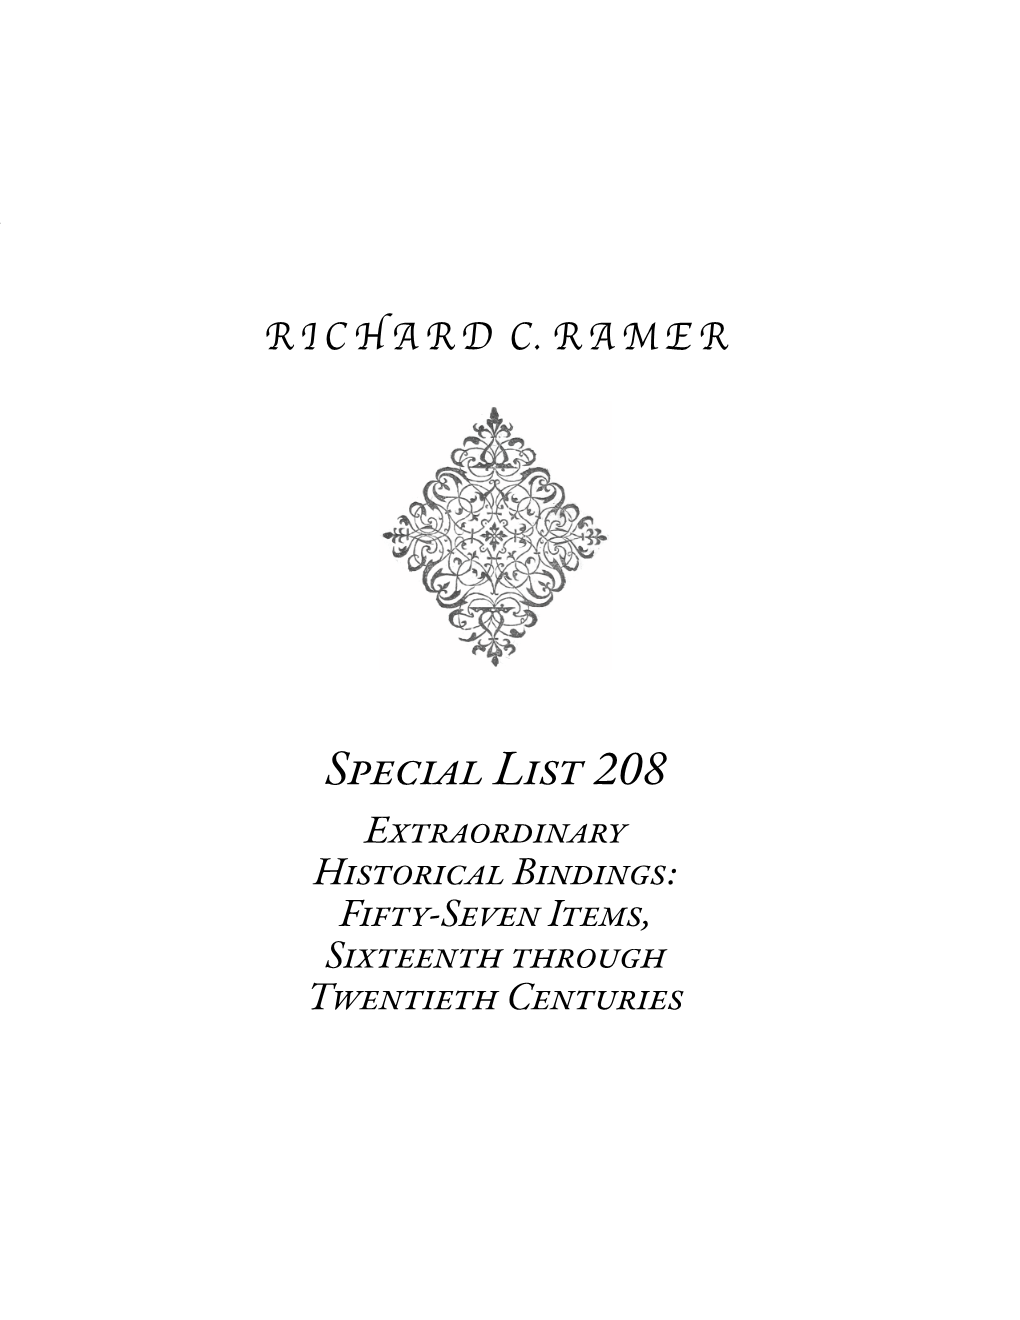 Special List 208 1